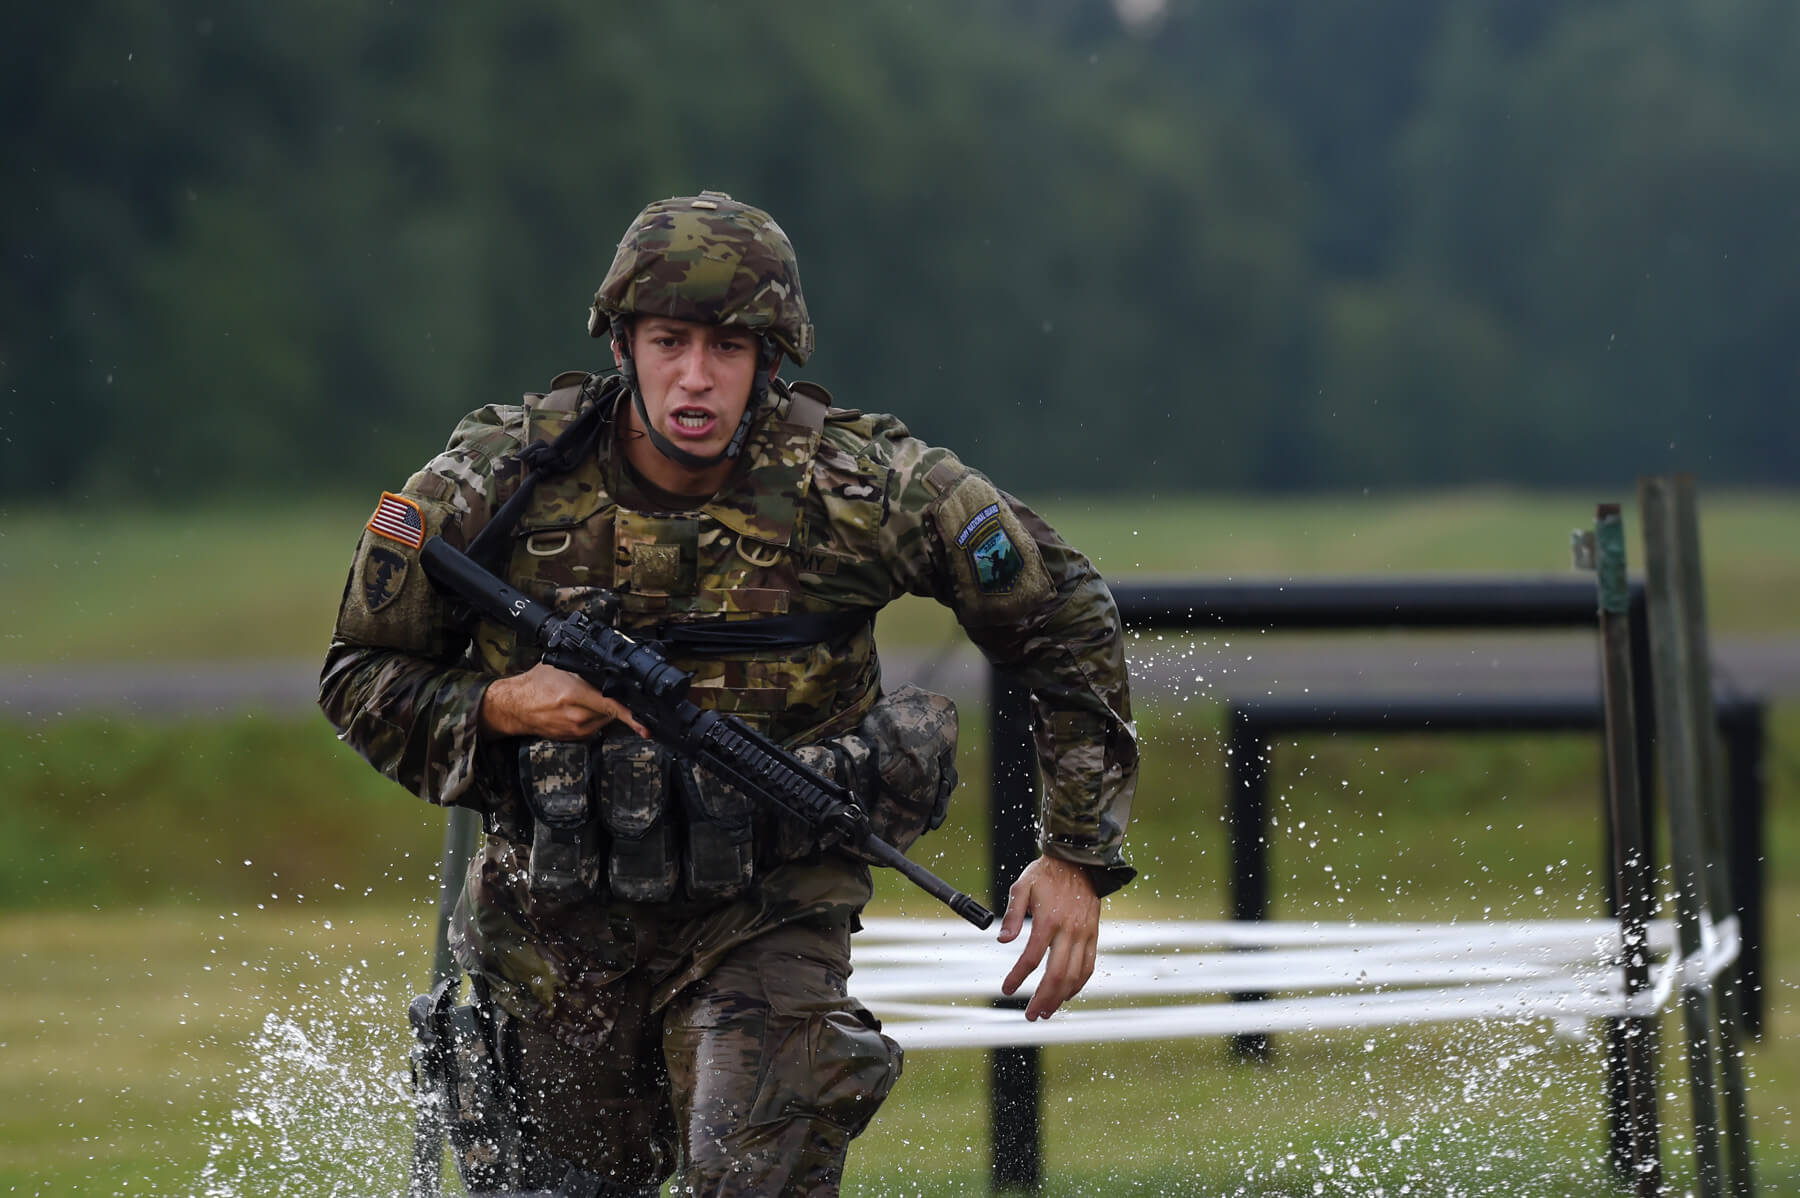 ARNG SGT Zachary Scuncio, a military police officer with the Rhode Island Army National Guard’s 169th Military Police Company, runs to his next objective while competing in the 2017 Best Warrior Competition at Camp Ripley, Minn. The competition is a three-day event that tests Soldiers on a variety of tactical and technical skills to determine the Army Guard’s Soldier and NCO of the year. The winners move on to compete in the Department of the Army Best Warrior Competition.